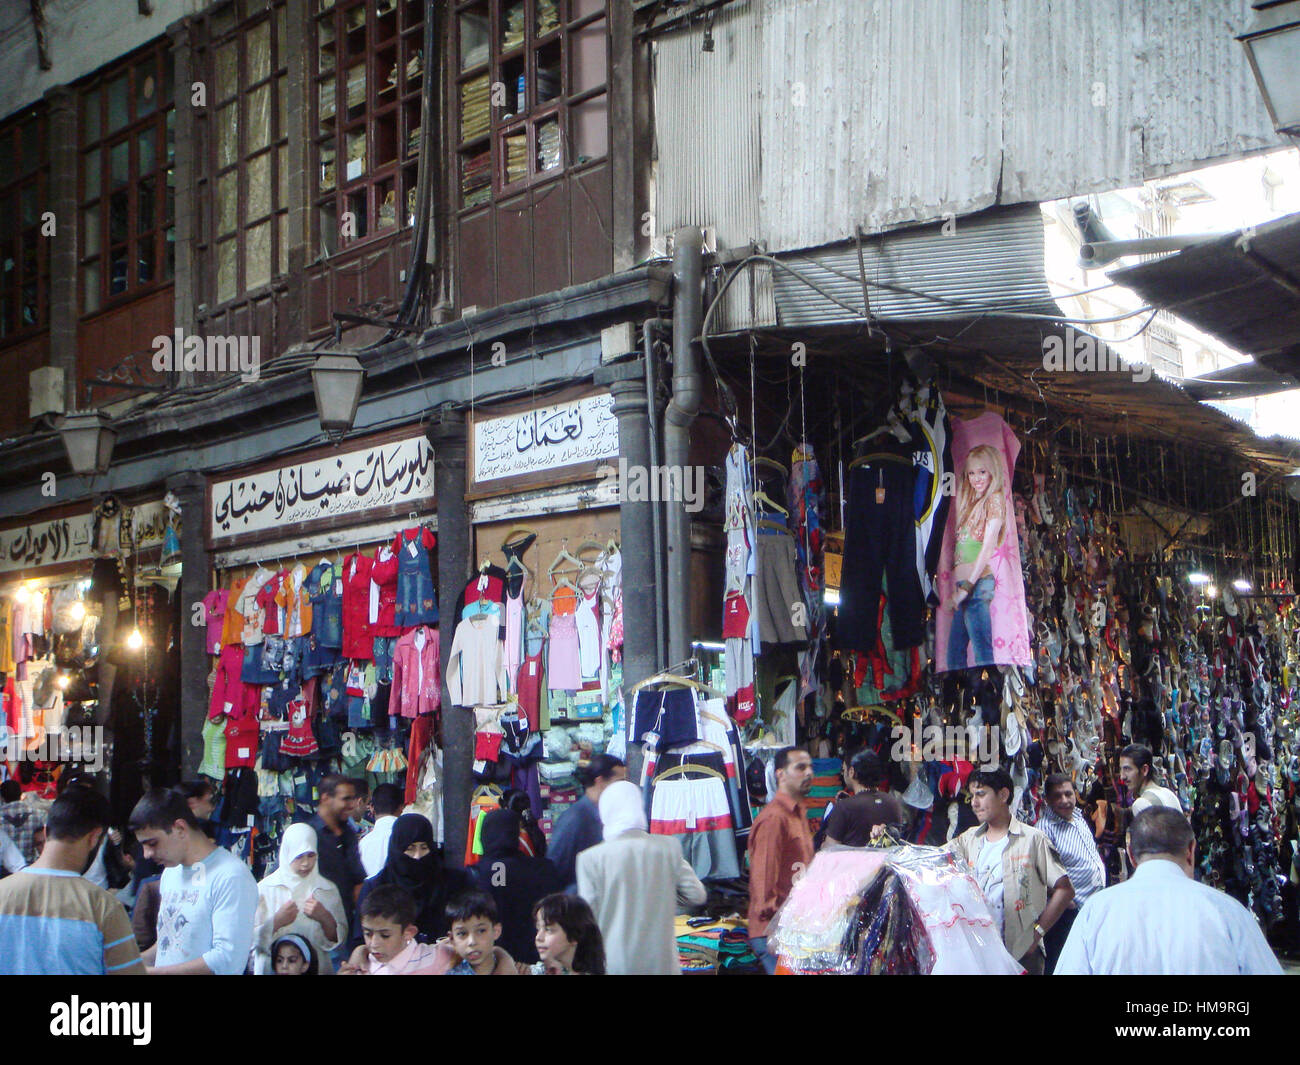 Al-Hamidiyah Souq: the biggest central market in Syria, located inside the old walled city of Damascus. picture taken in 2008 be Stock Photo